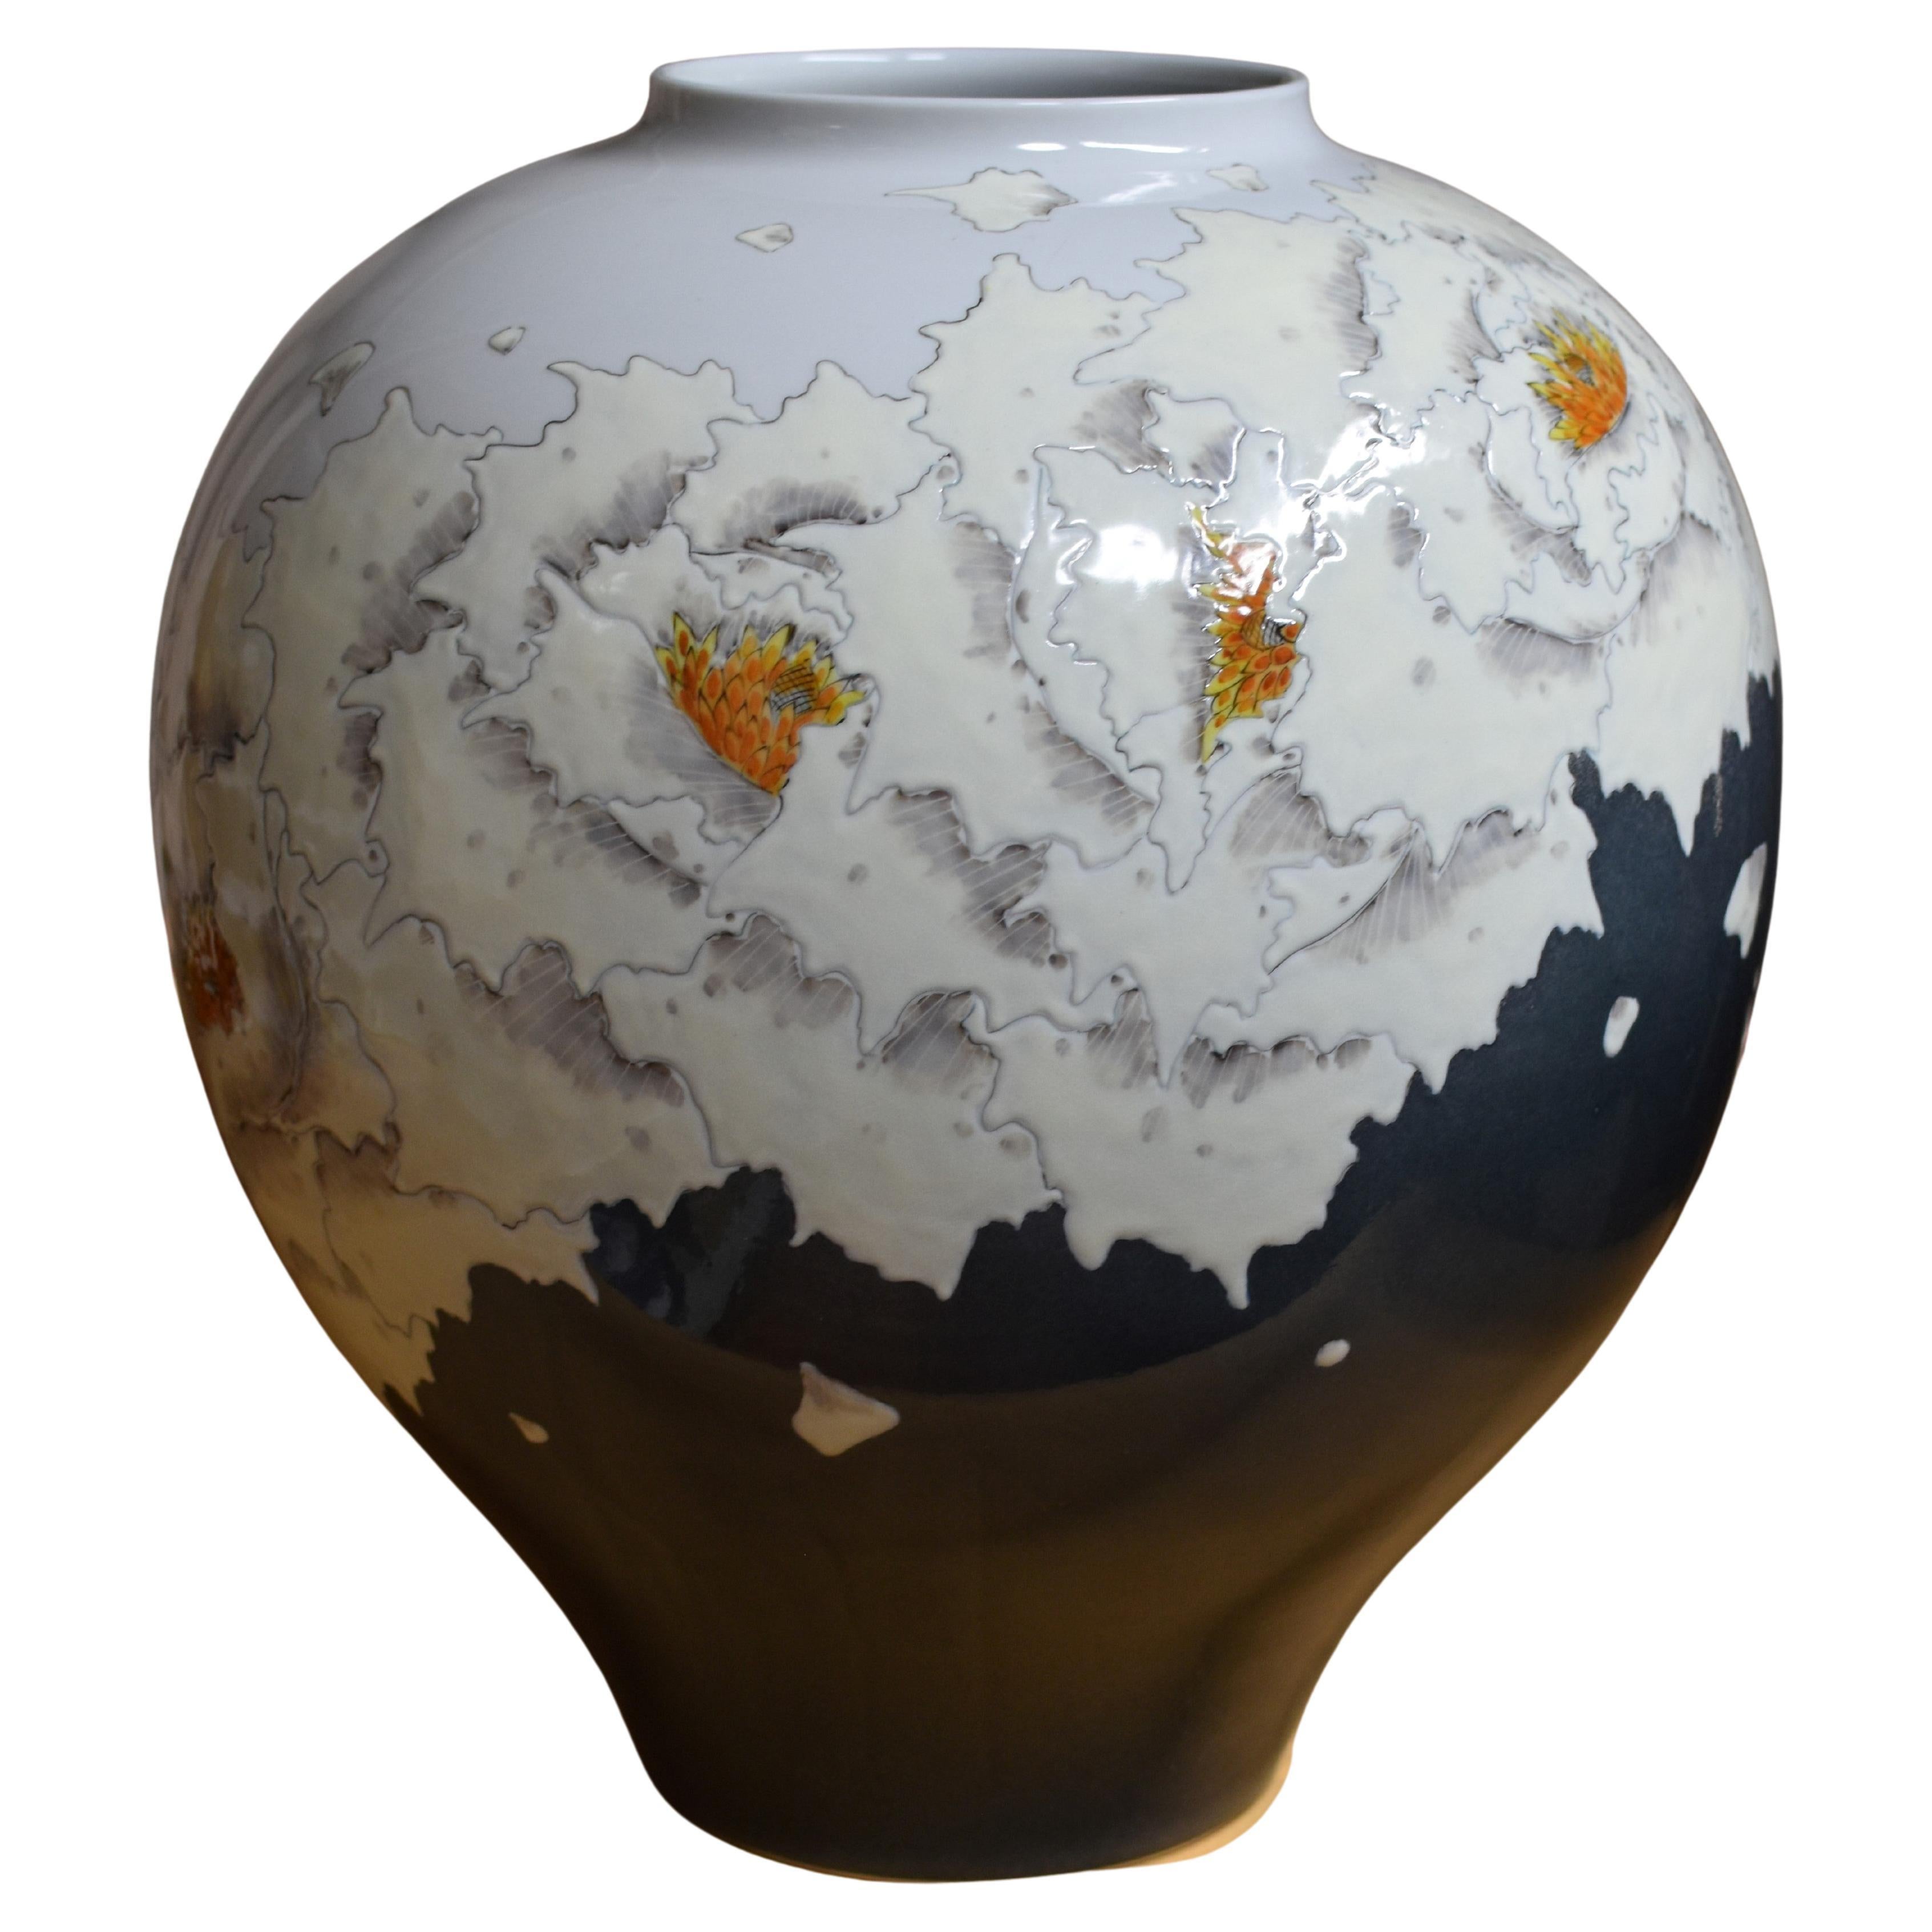 Hand-Painted Contemporary Japanese Cream Black White Porcelain Vase by Master Artist For Sale